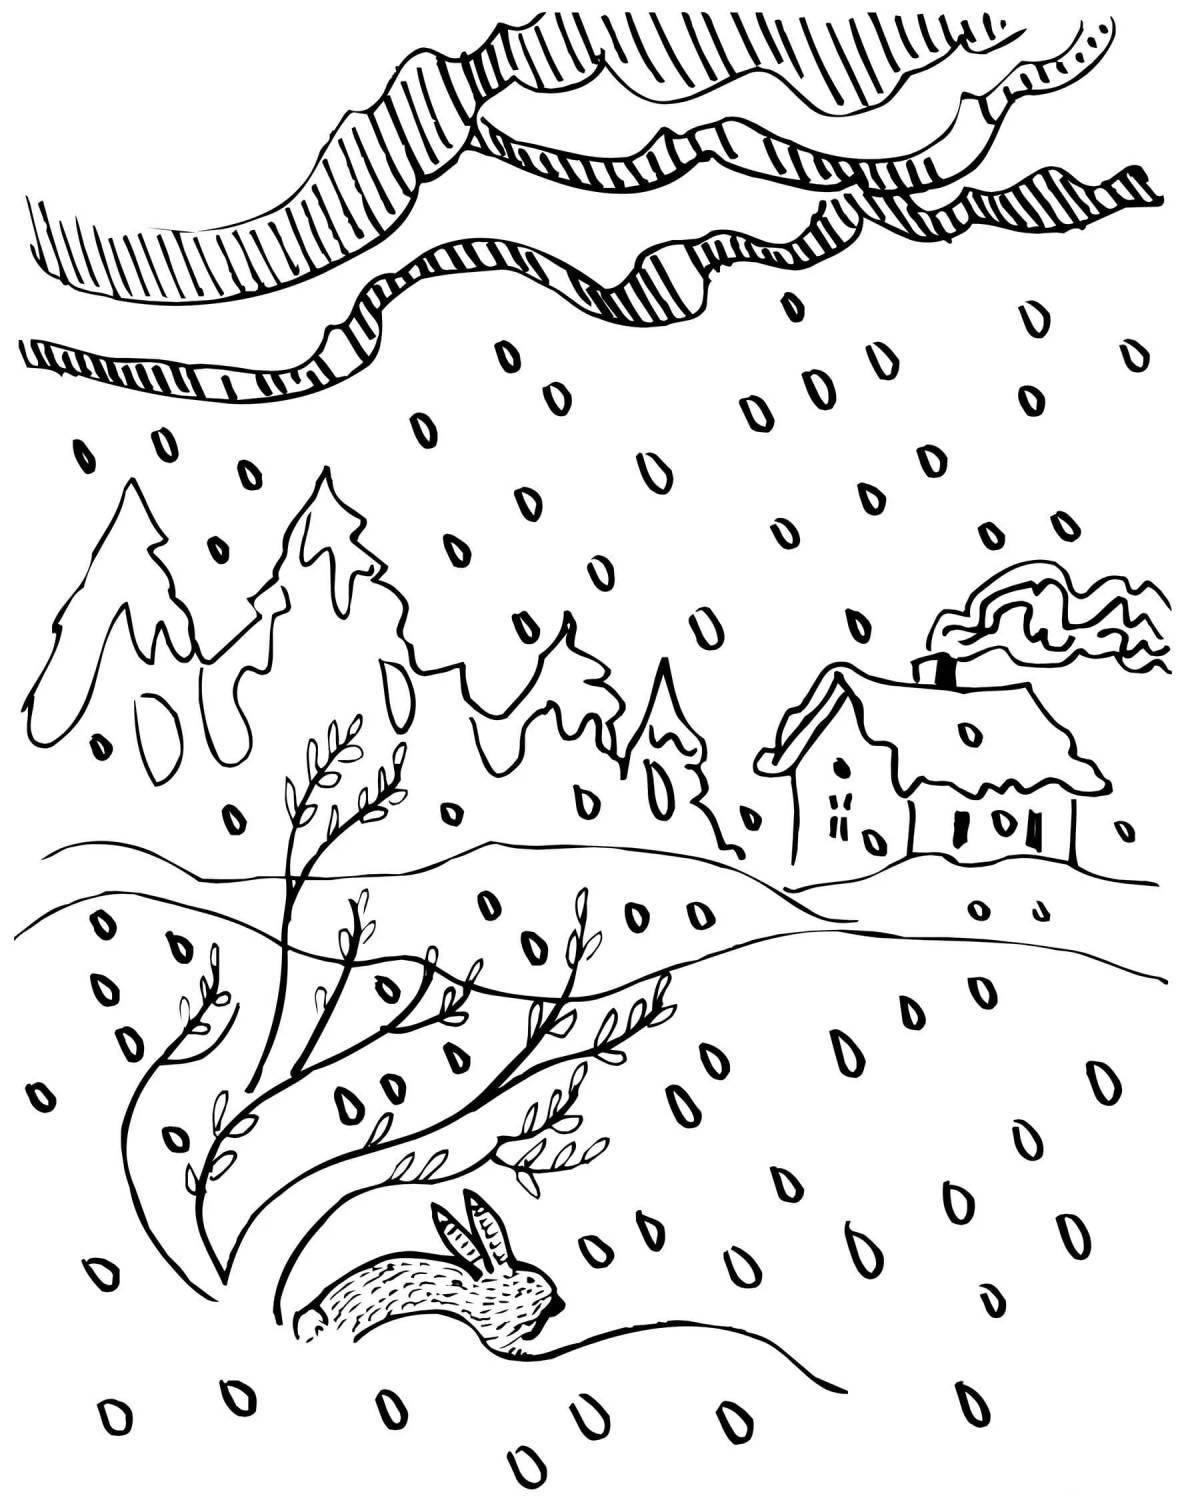 Gorgeous snowfall coloring book for kids